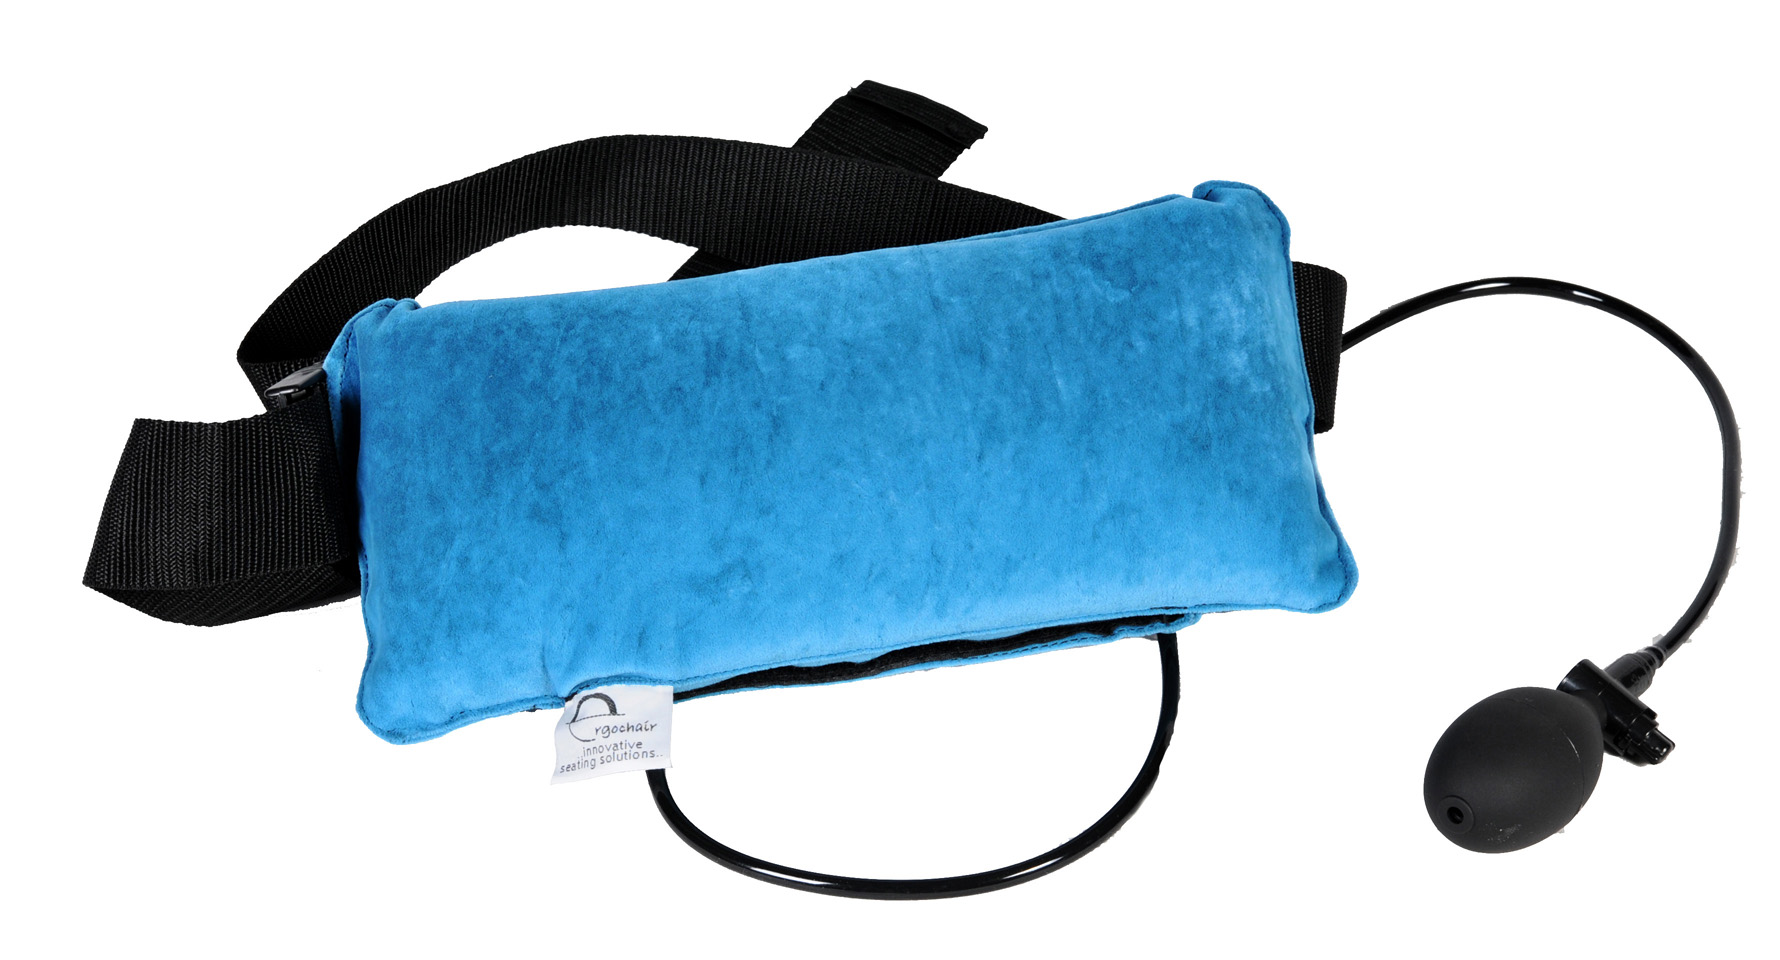 Actyv Inflatable Portable Lumbar Support